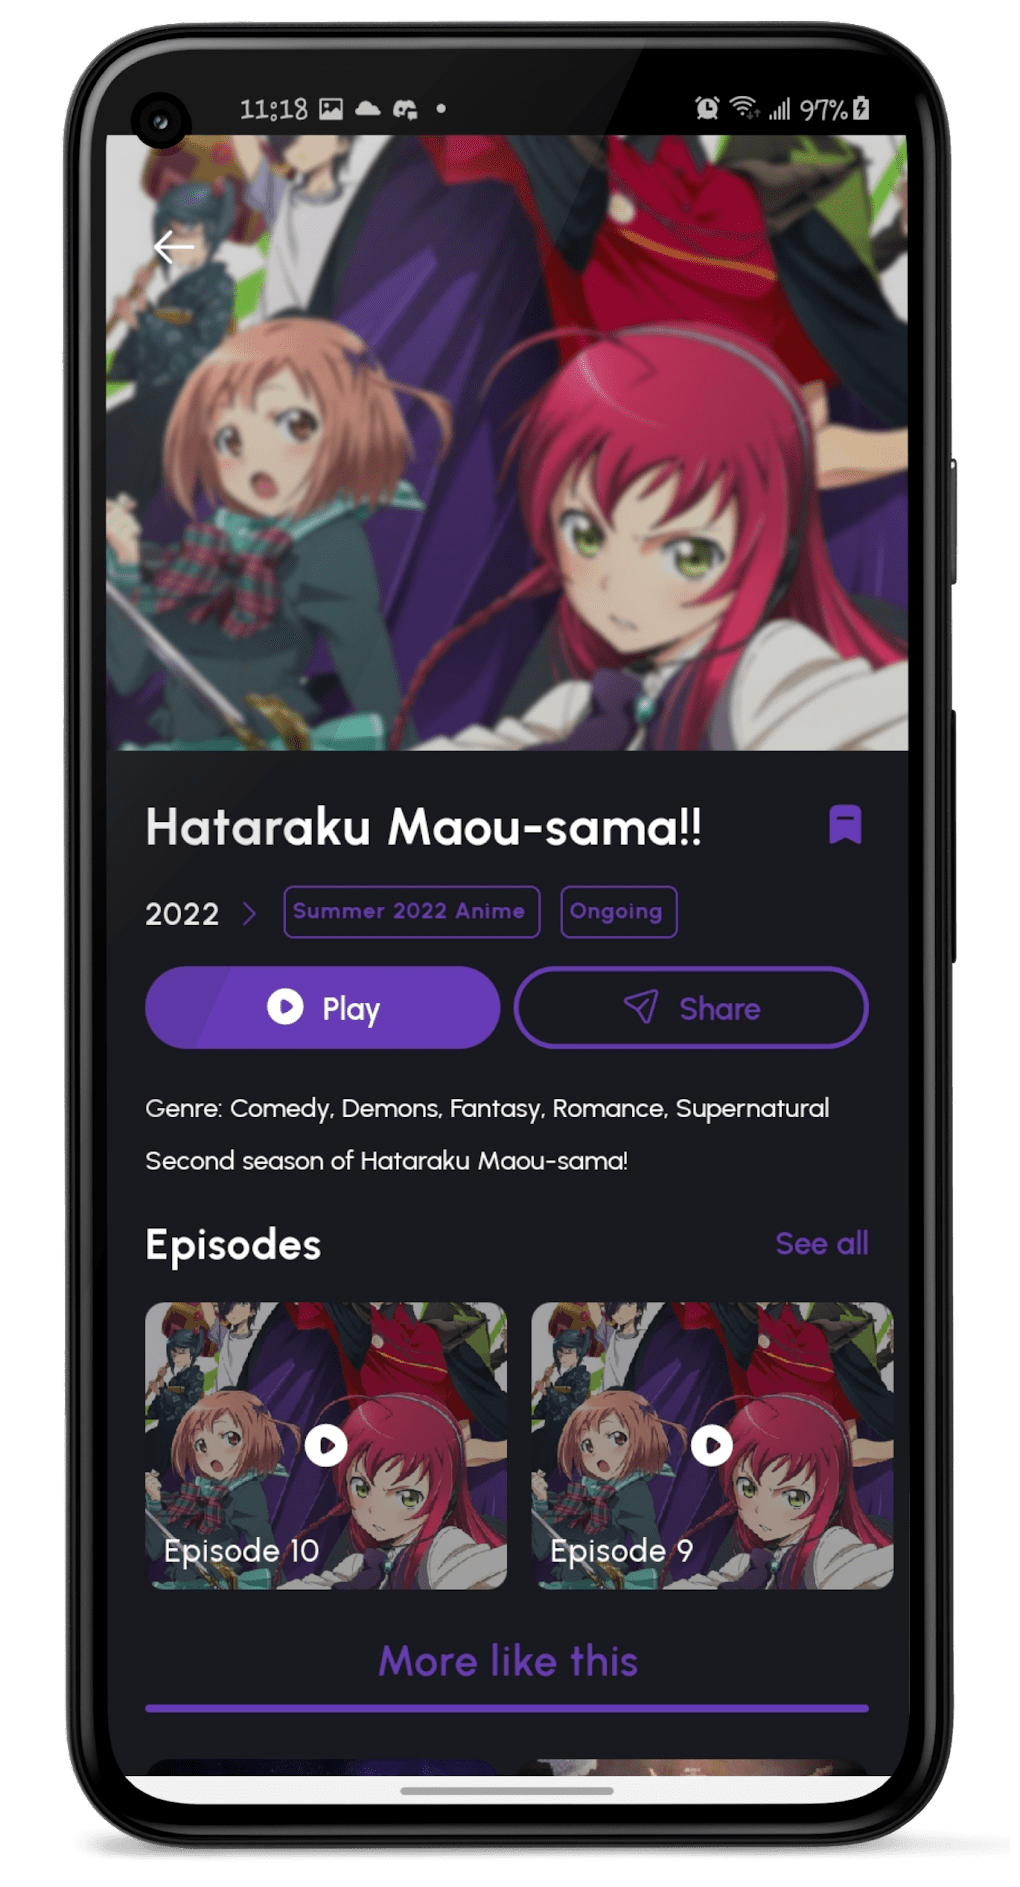 Watch Anime Series Online - APK Download for Android